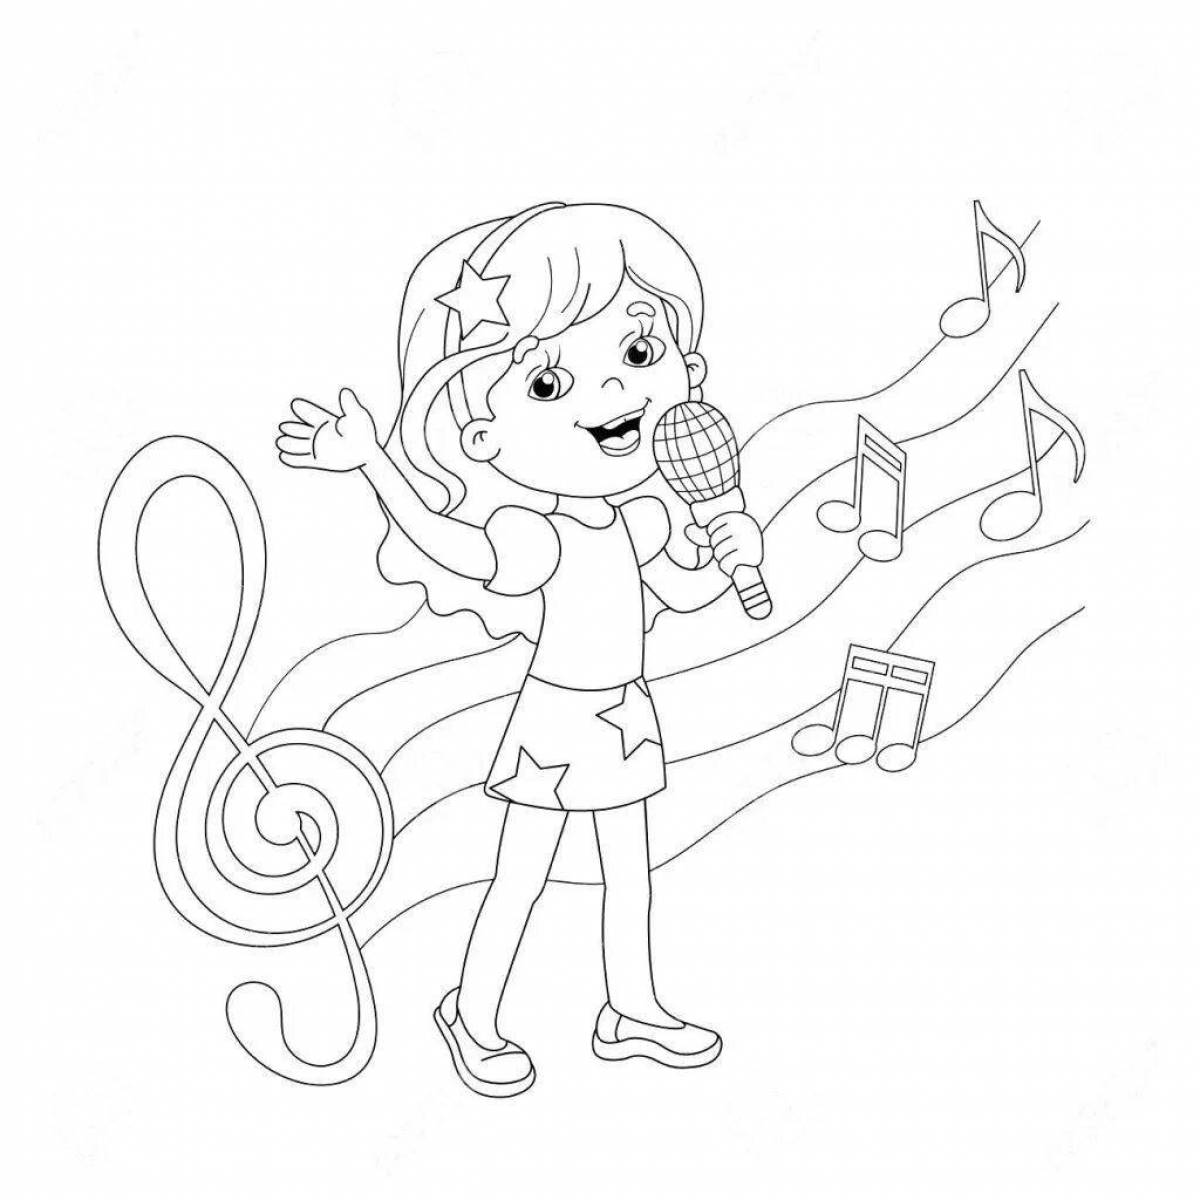 Coloring page festive singing